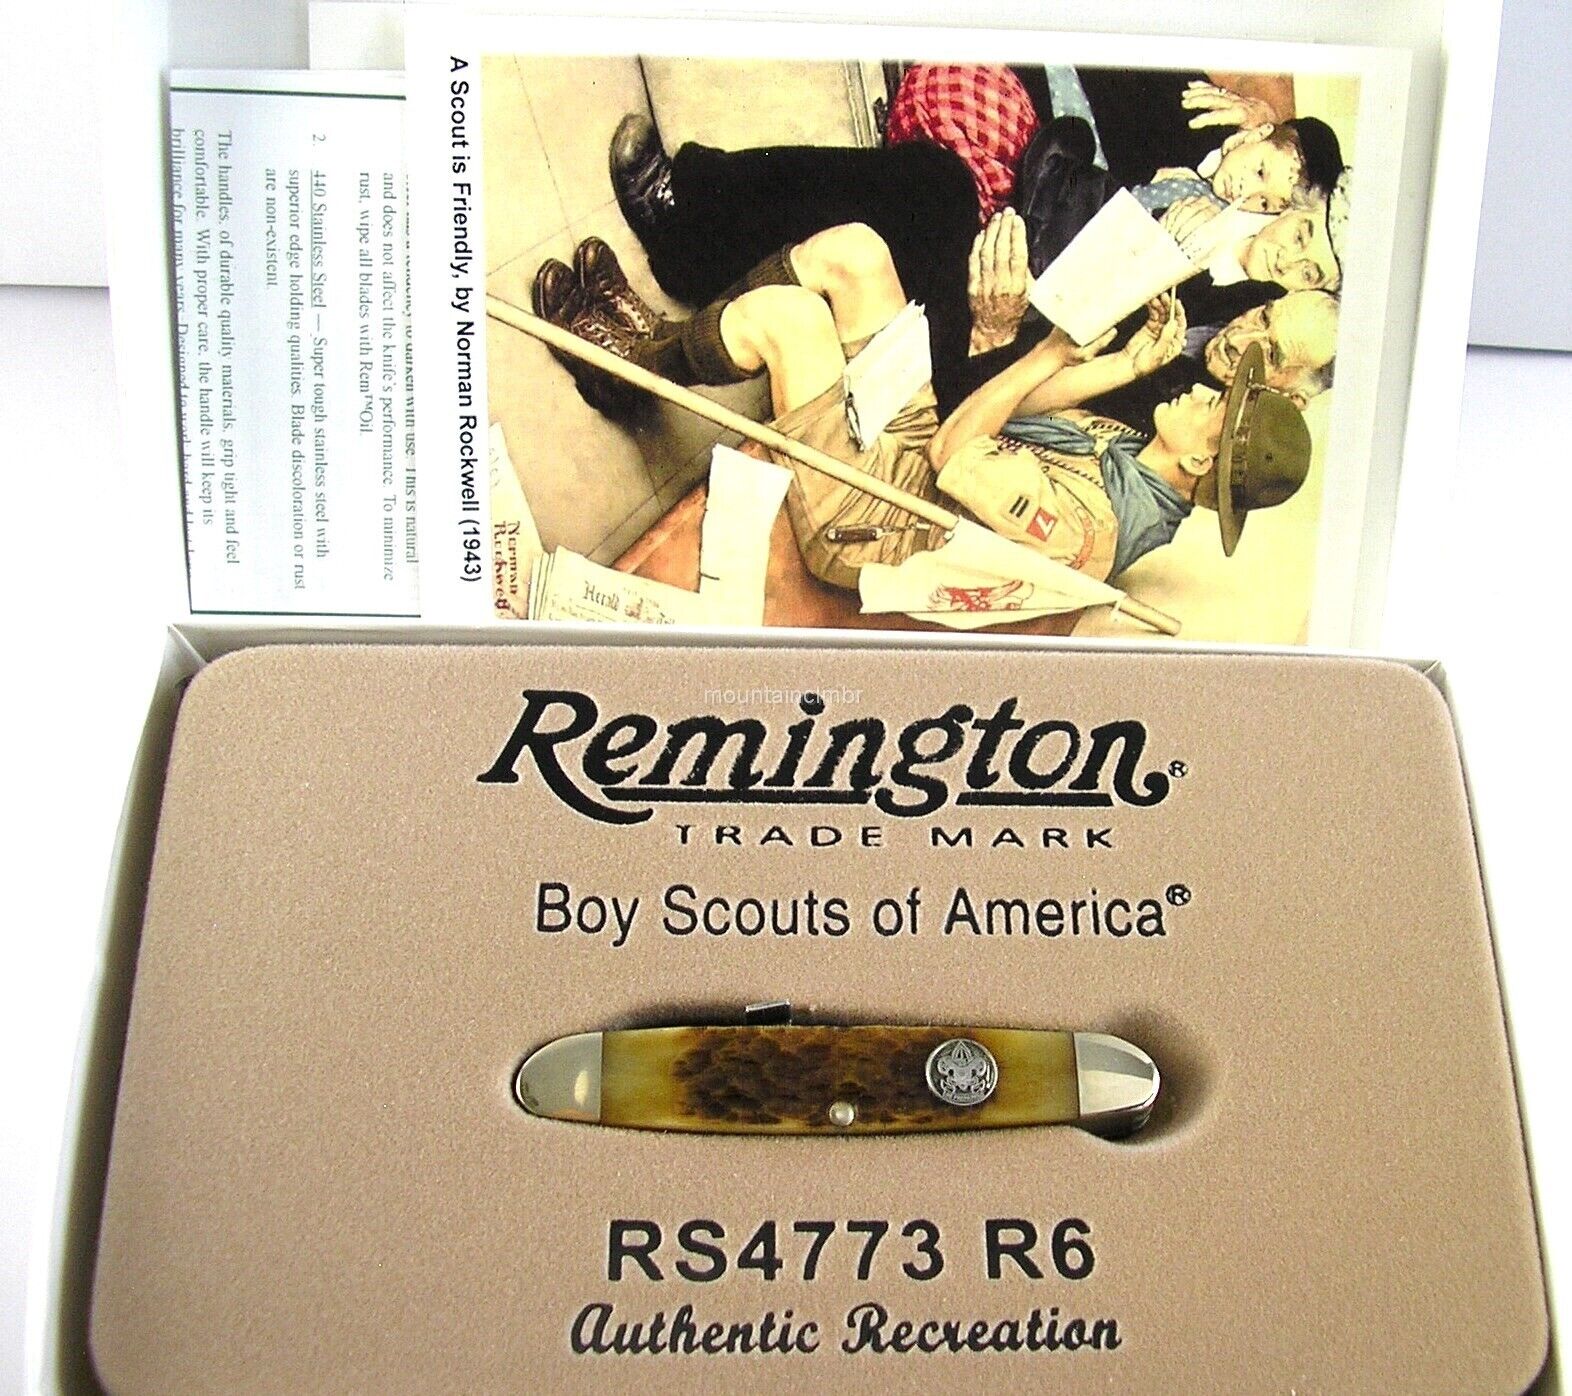 Remington Boy Scout Collectors Edition 2011 R19865 Knife USA RARE DISCONTINUED